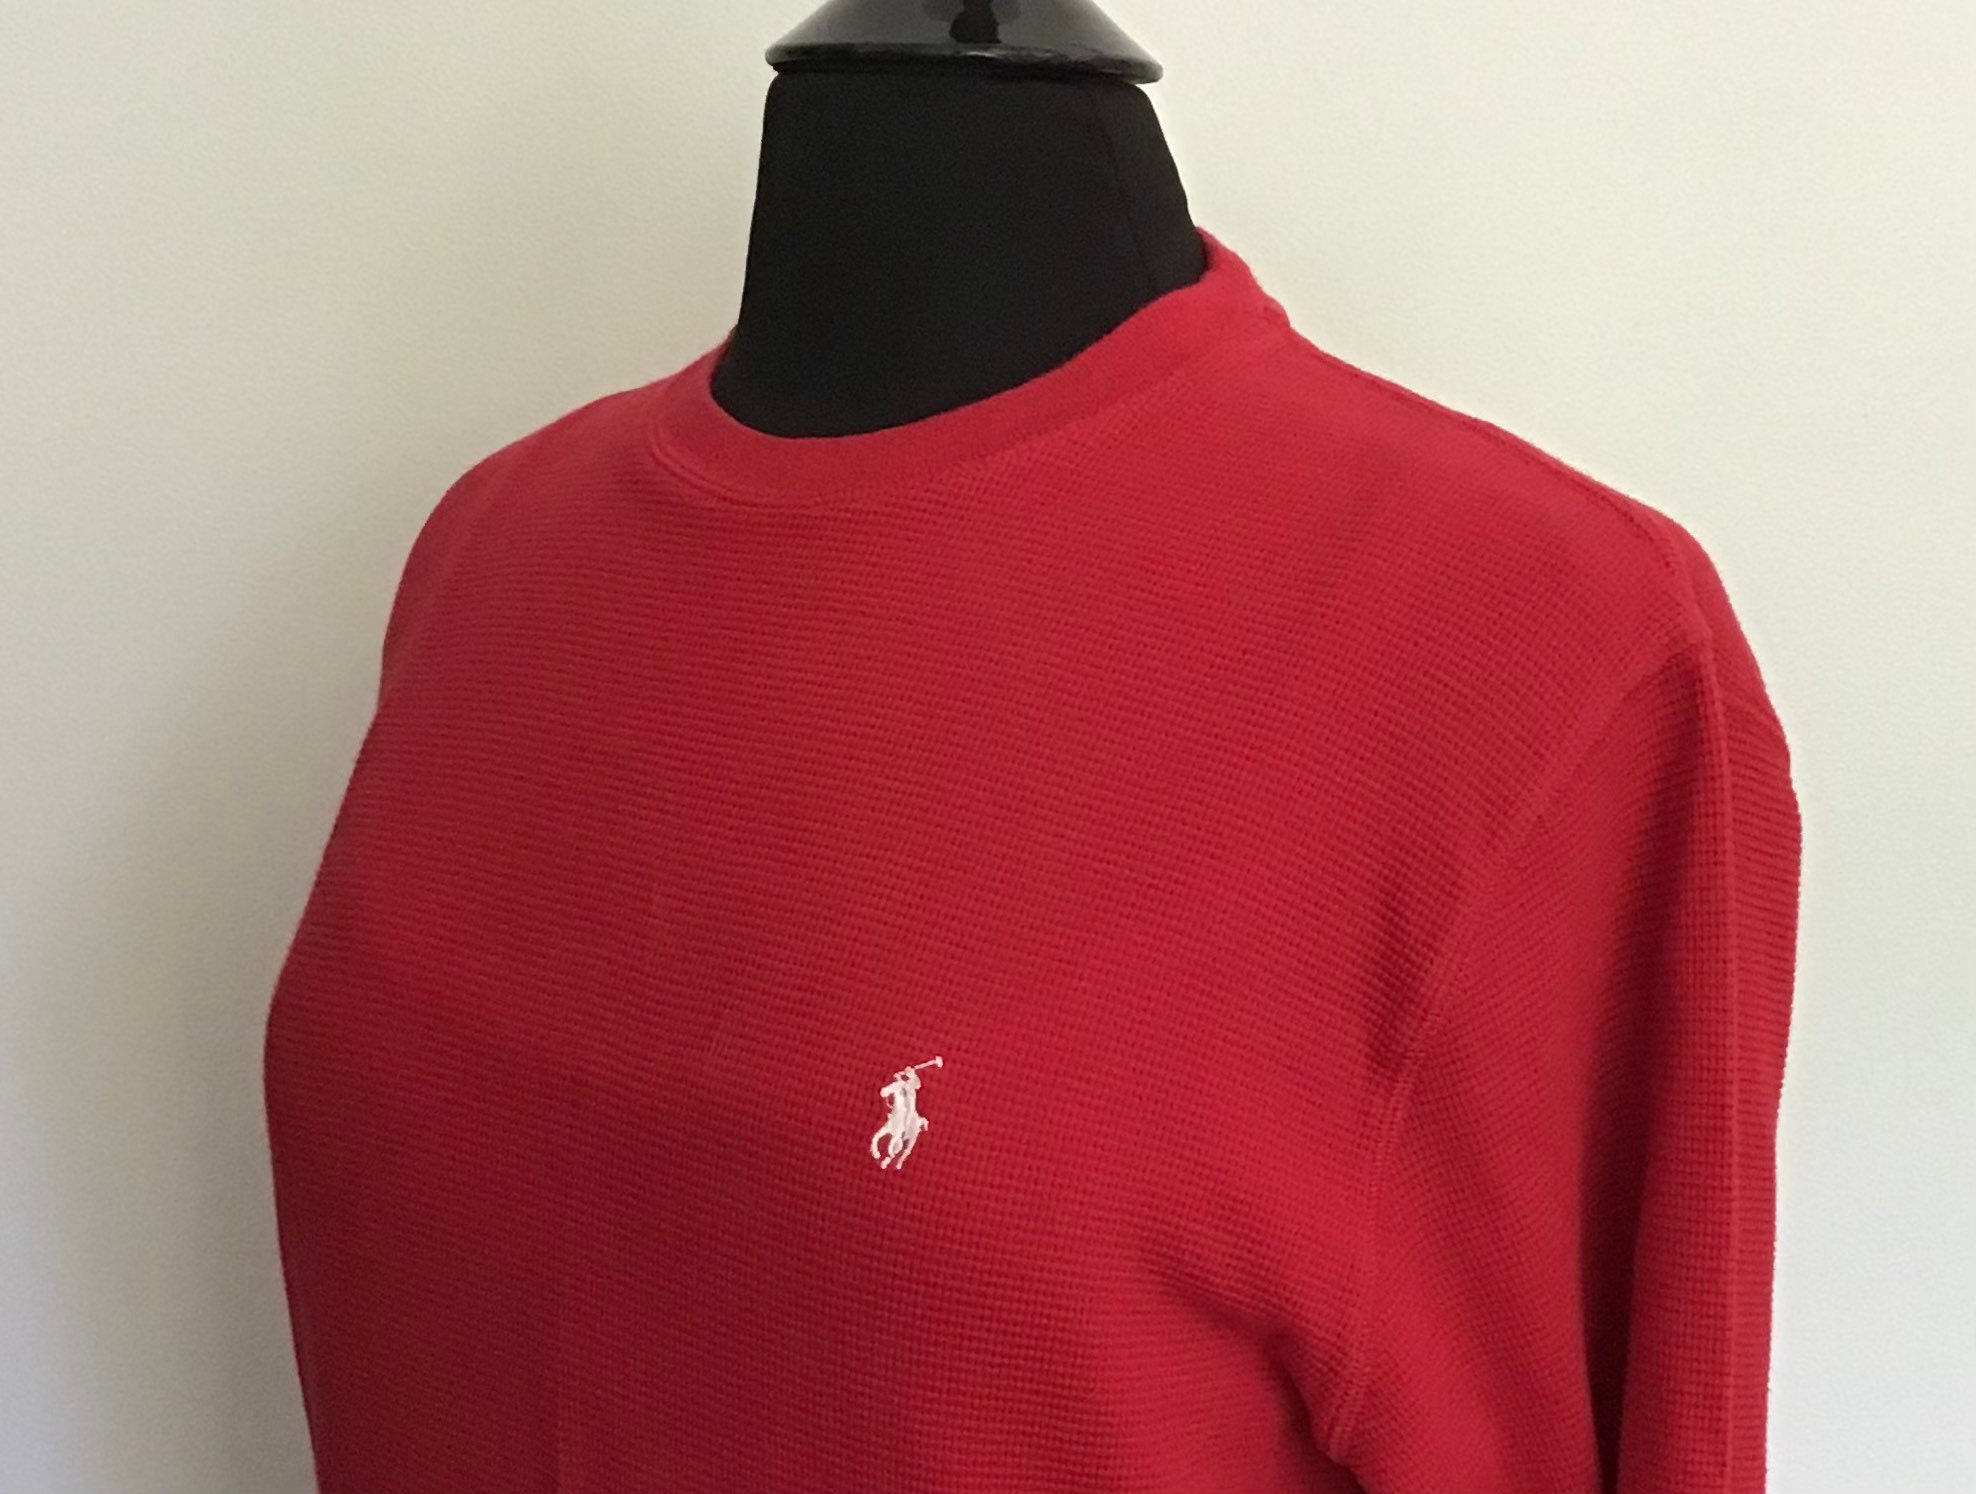 Polo Ralph Lauren Waffle Knit Long Sleeve Thermal T Shirt Red - Etsy